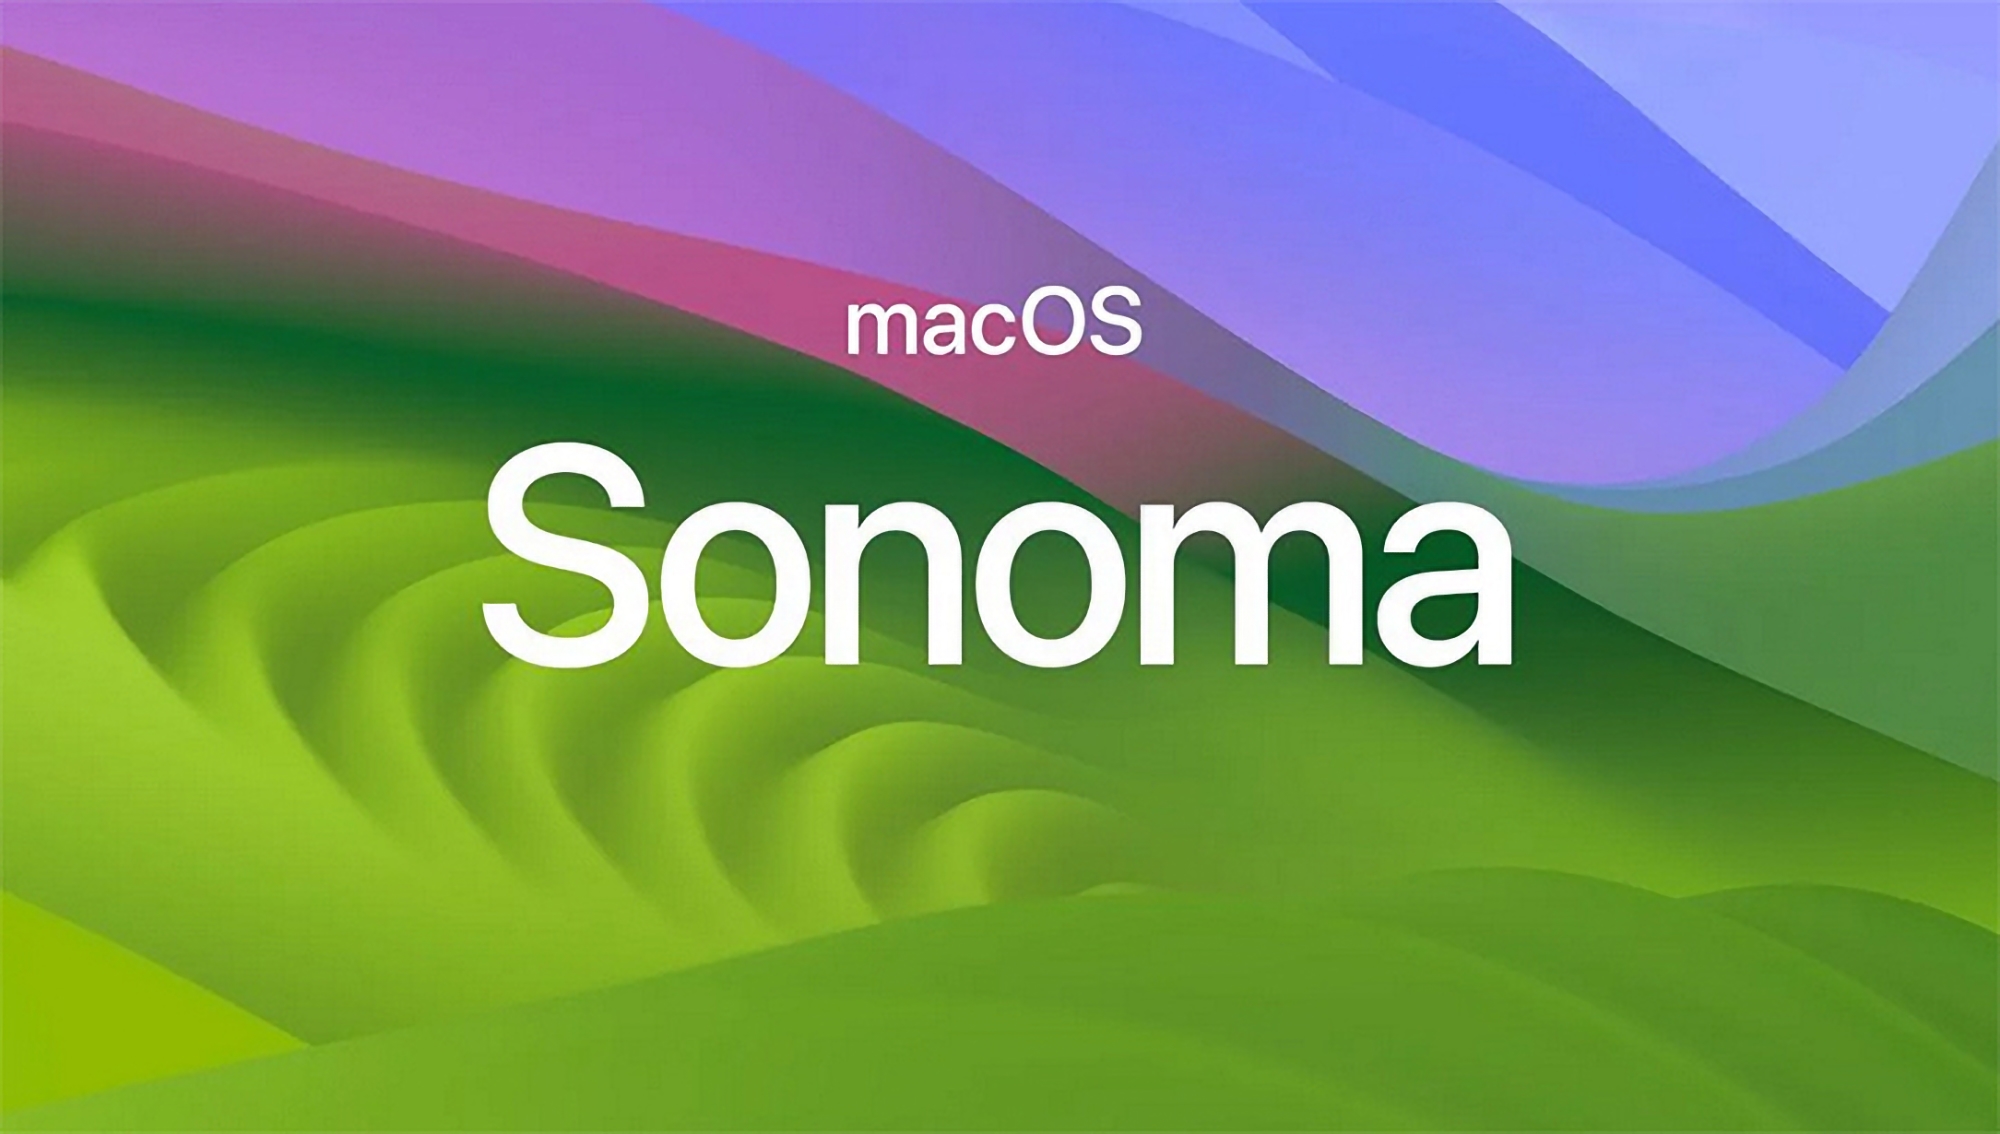 Not just iOS 17.6 and watchOS 10.6: the stable version of macOS Sonoma 14.6 has been released